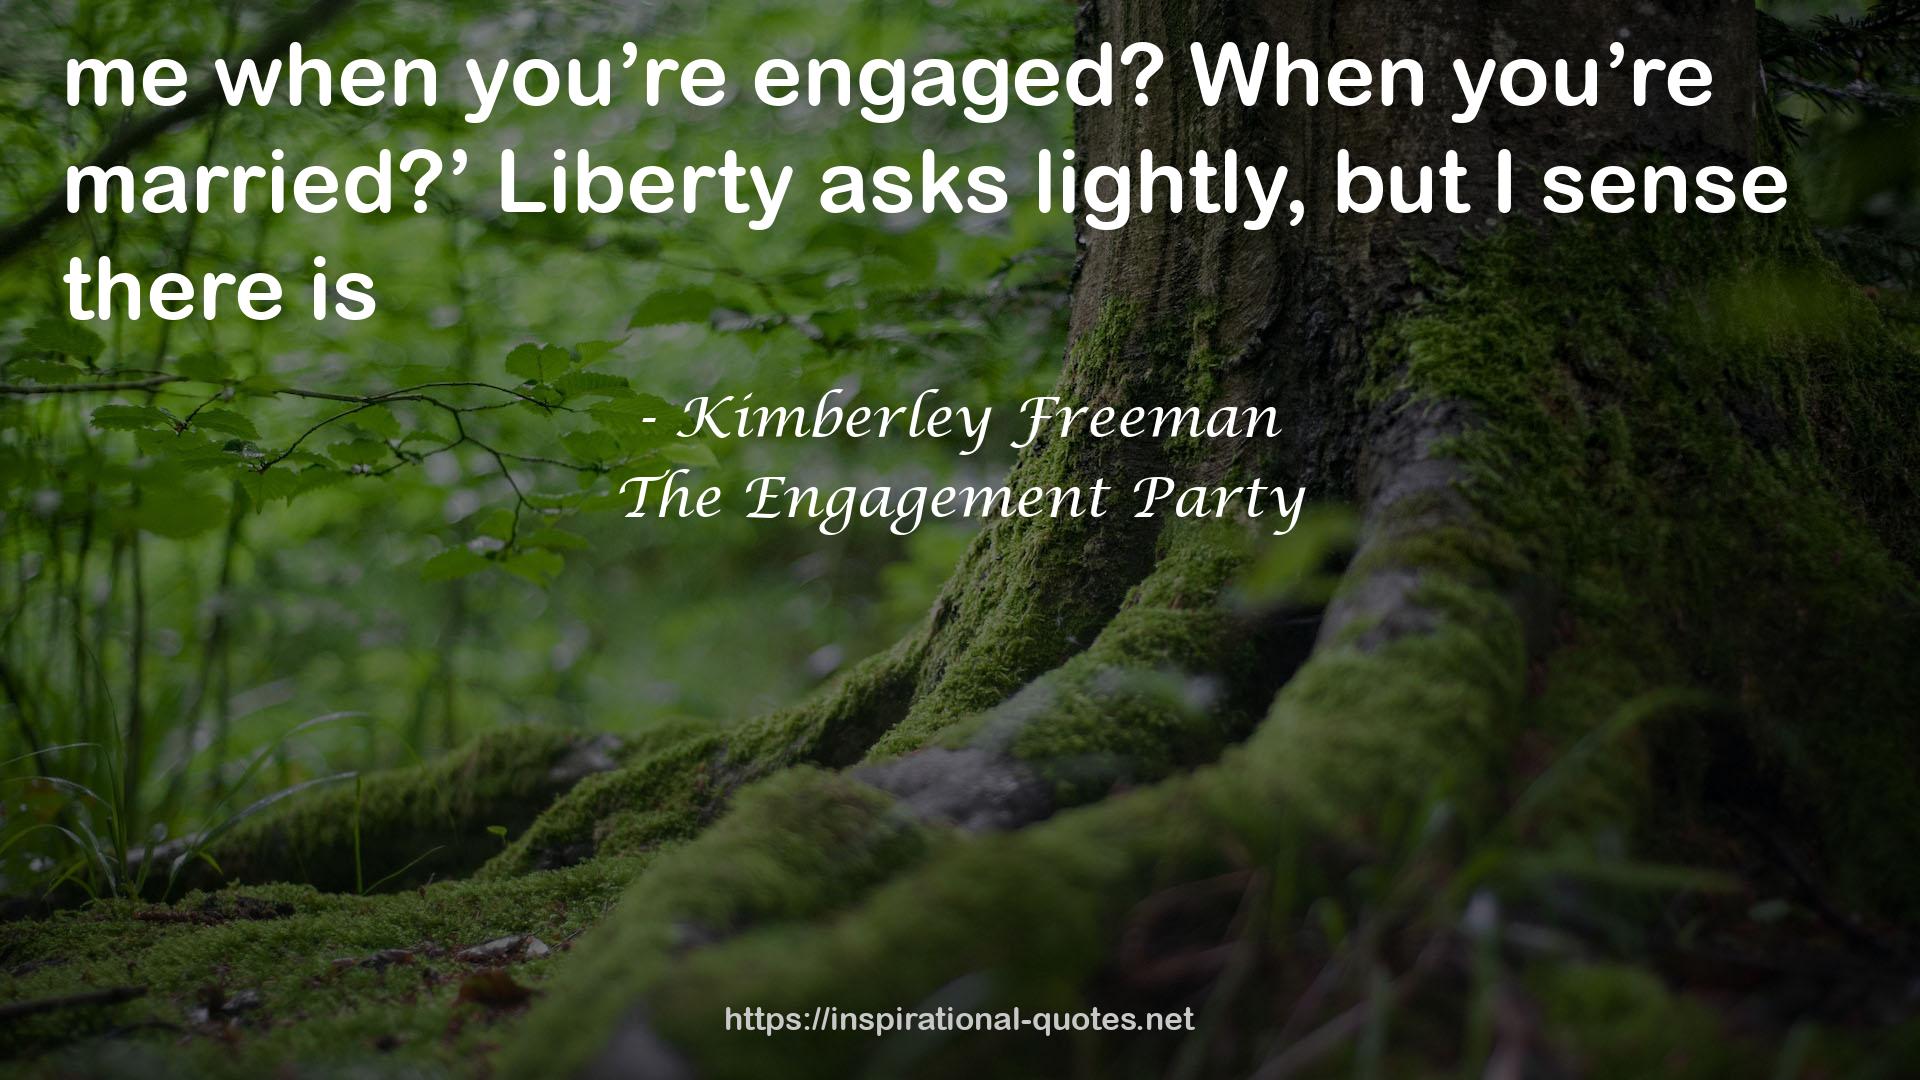 The Engagement Party QUOTES